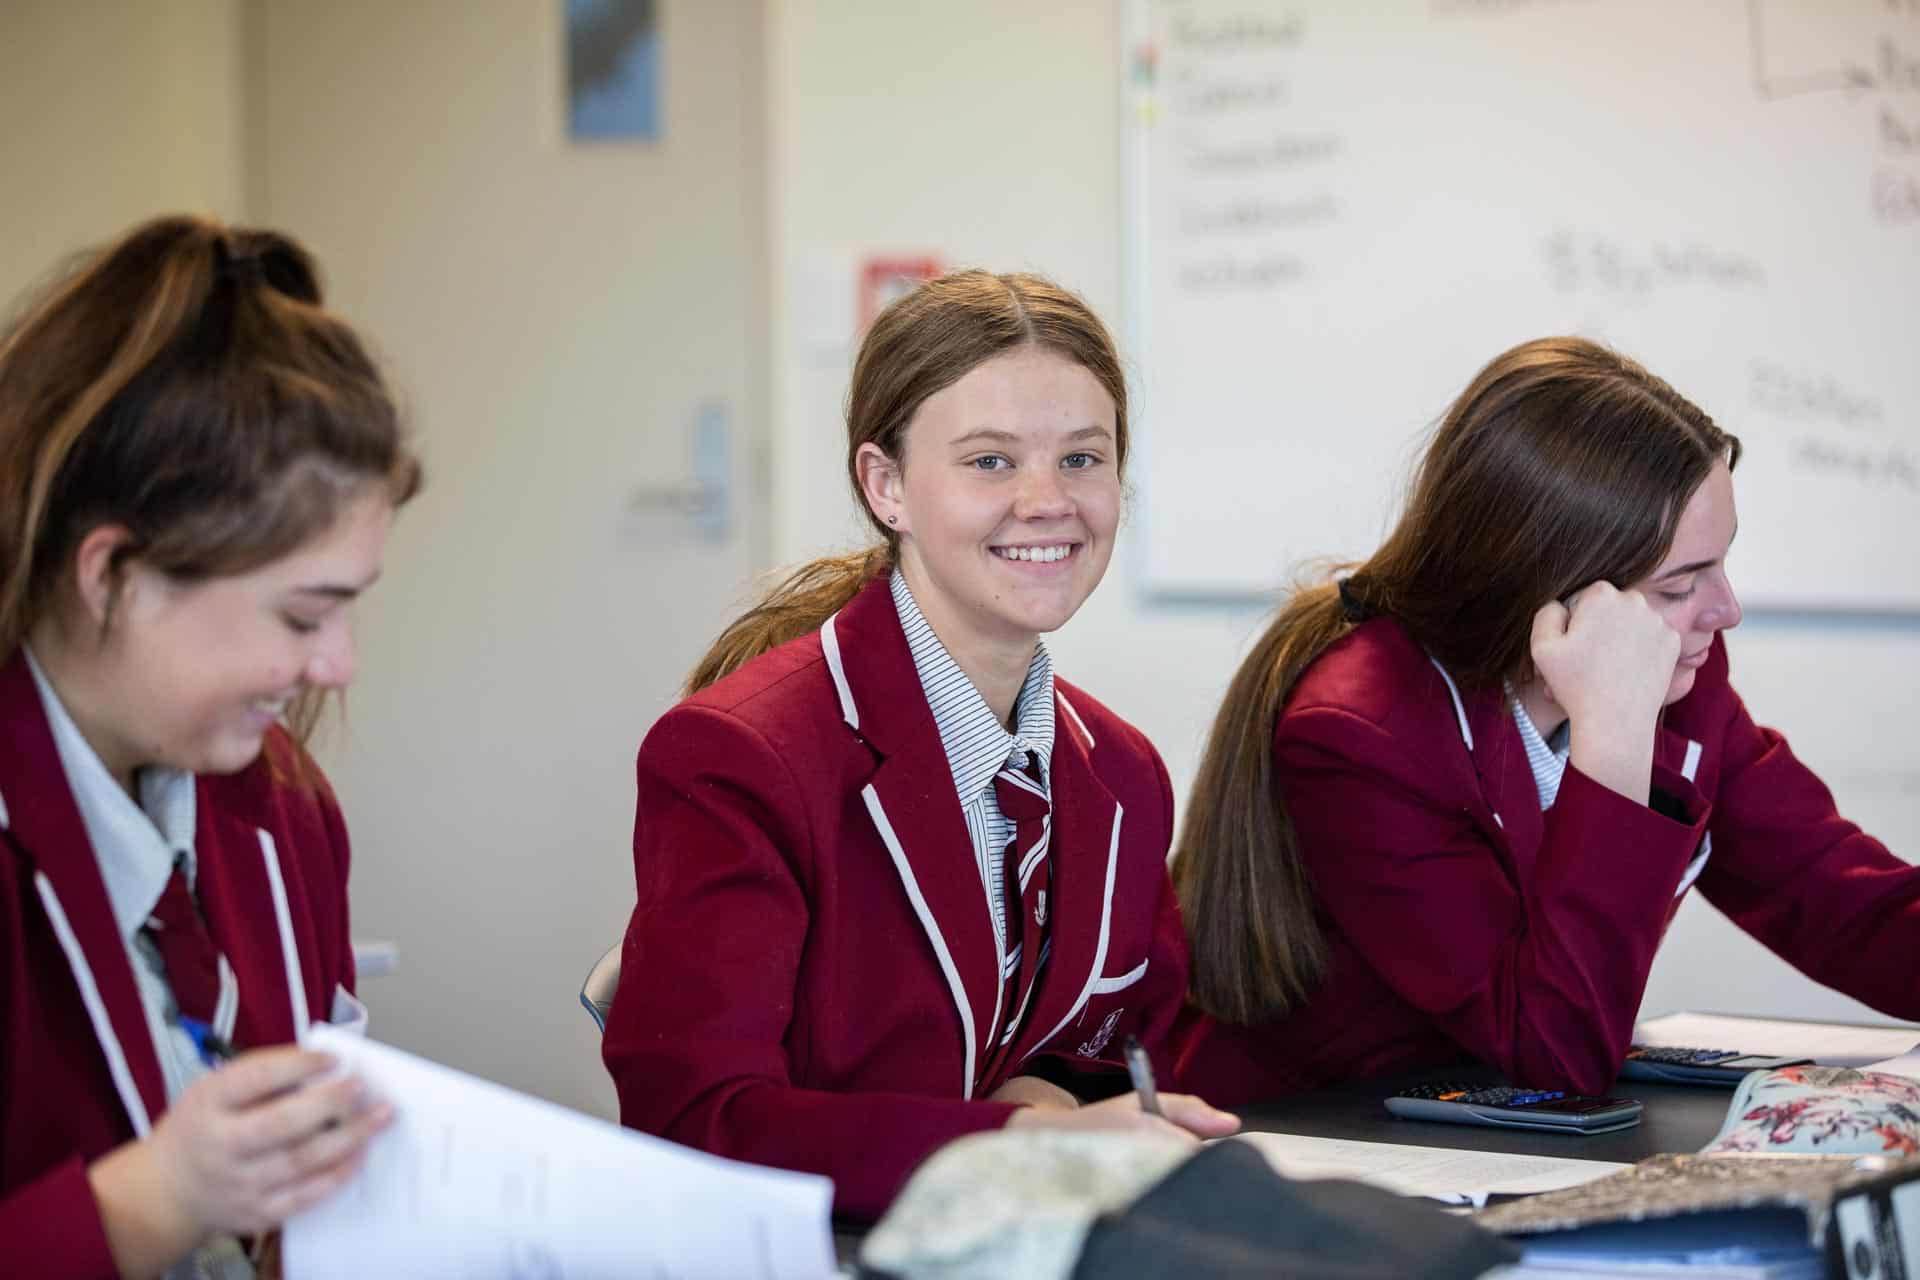 Top private high school | Our school | Woodford House